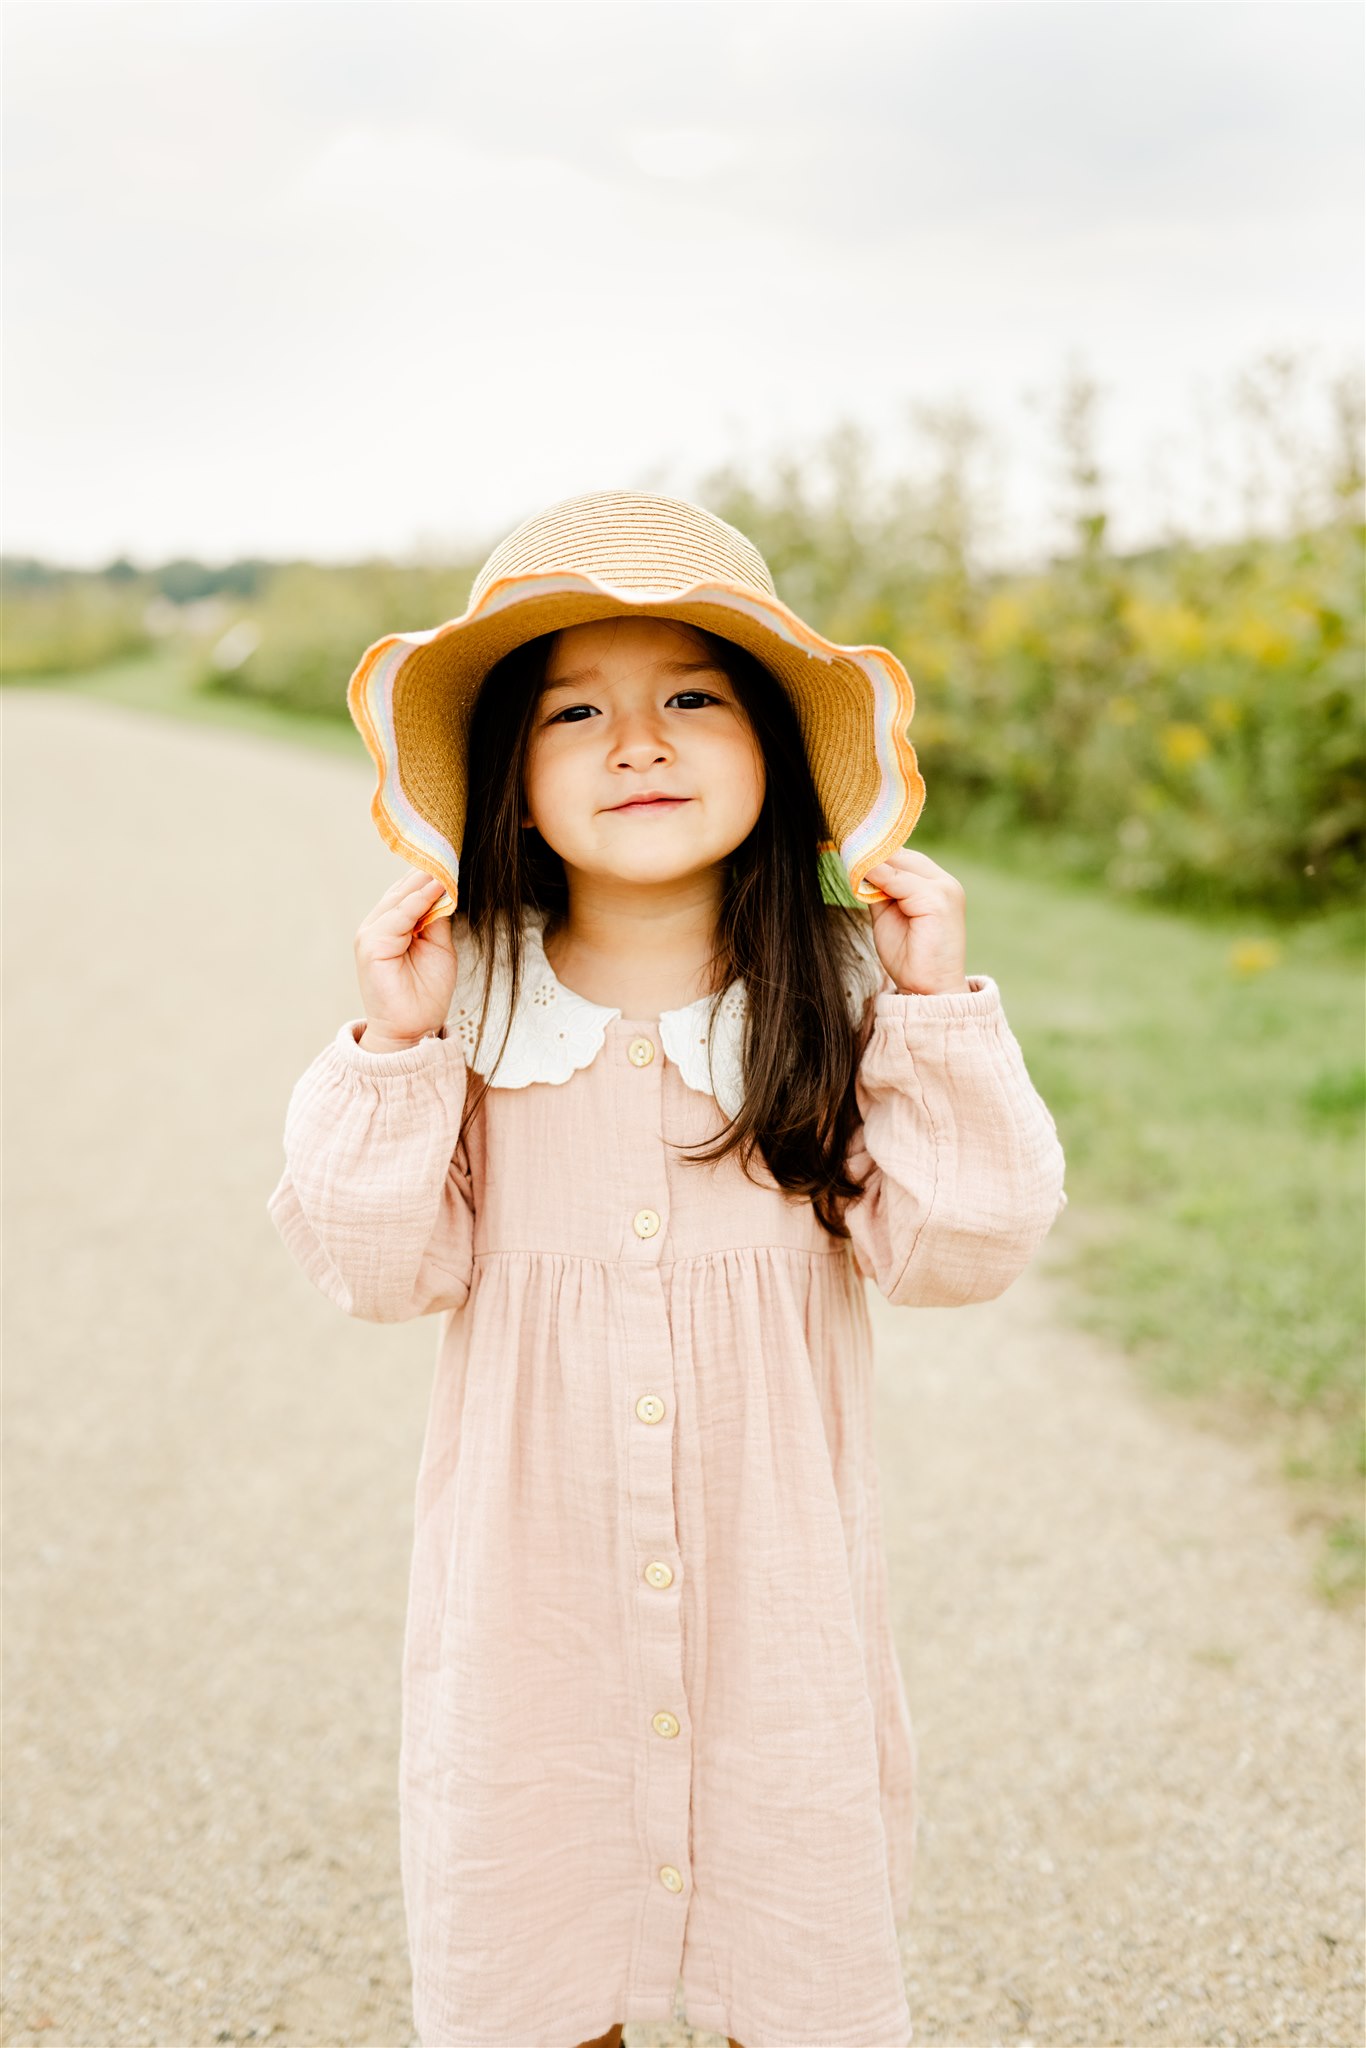 A young toddler girl in a pink dress plays in a park path with a large yellow sun hat